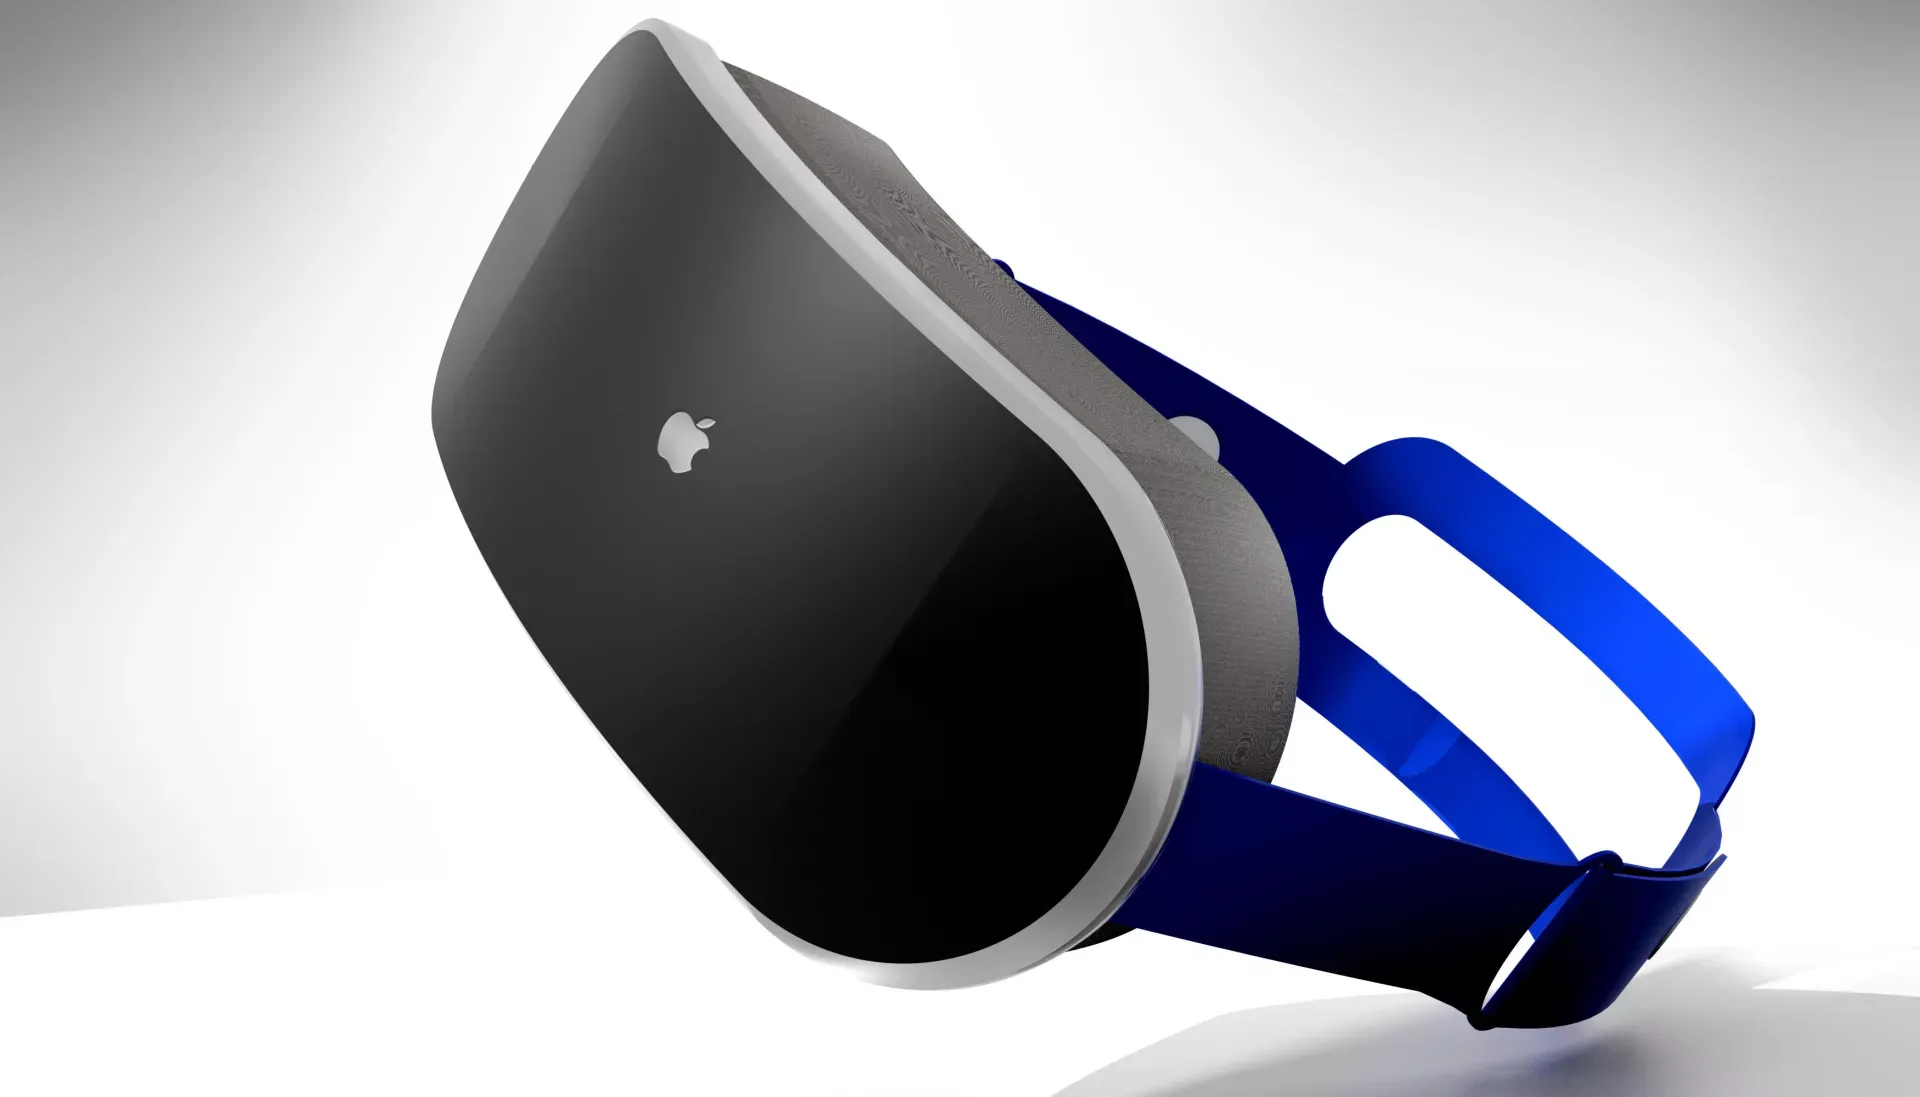 Render of how the Apple Mixed Reality Headset could look like